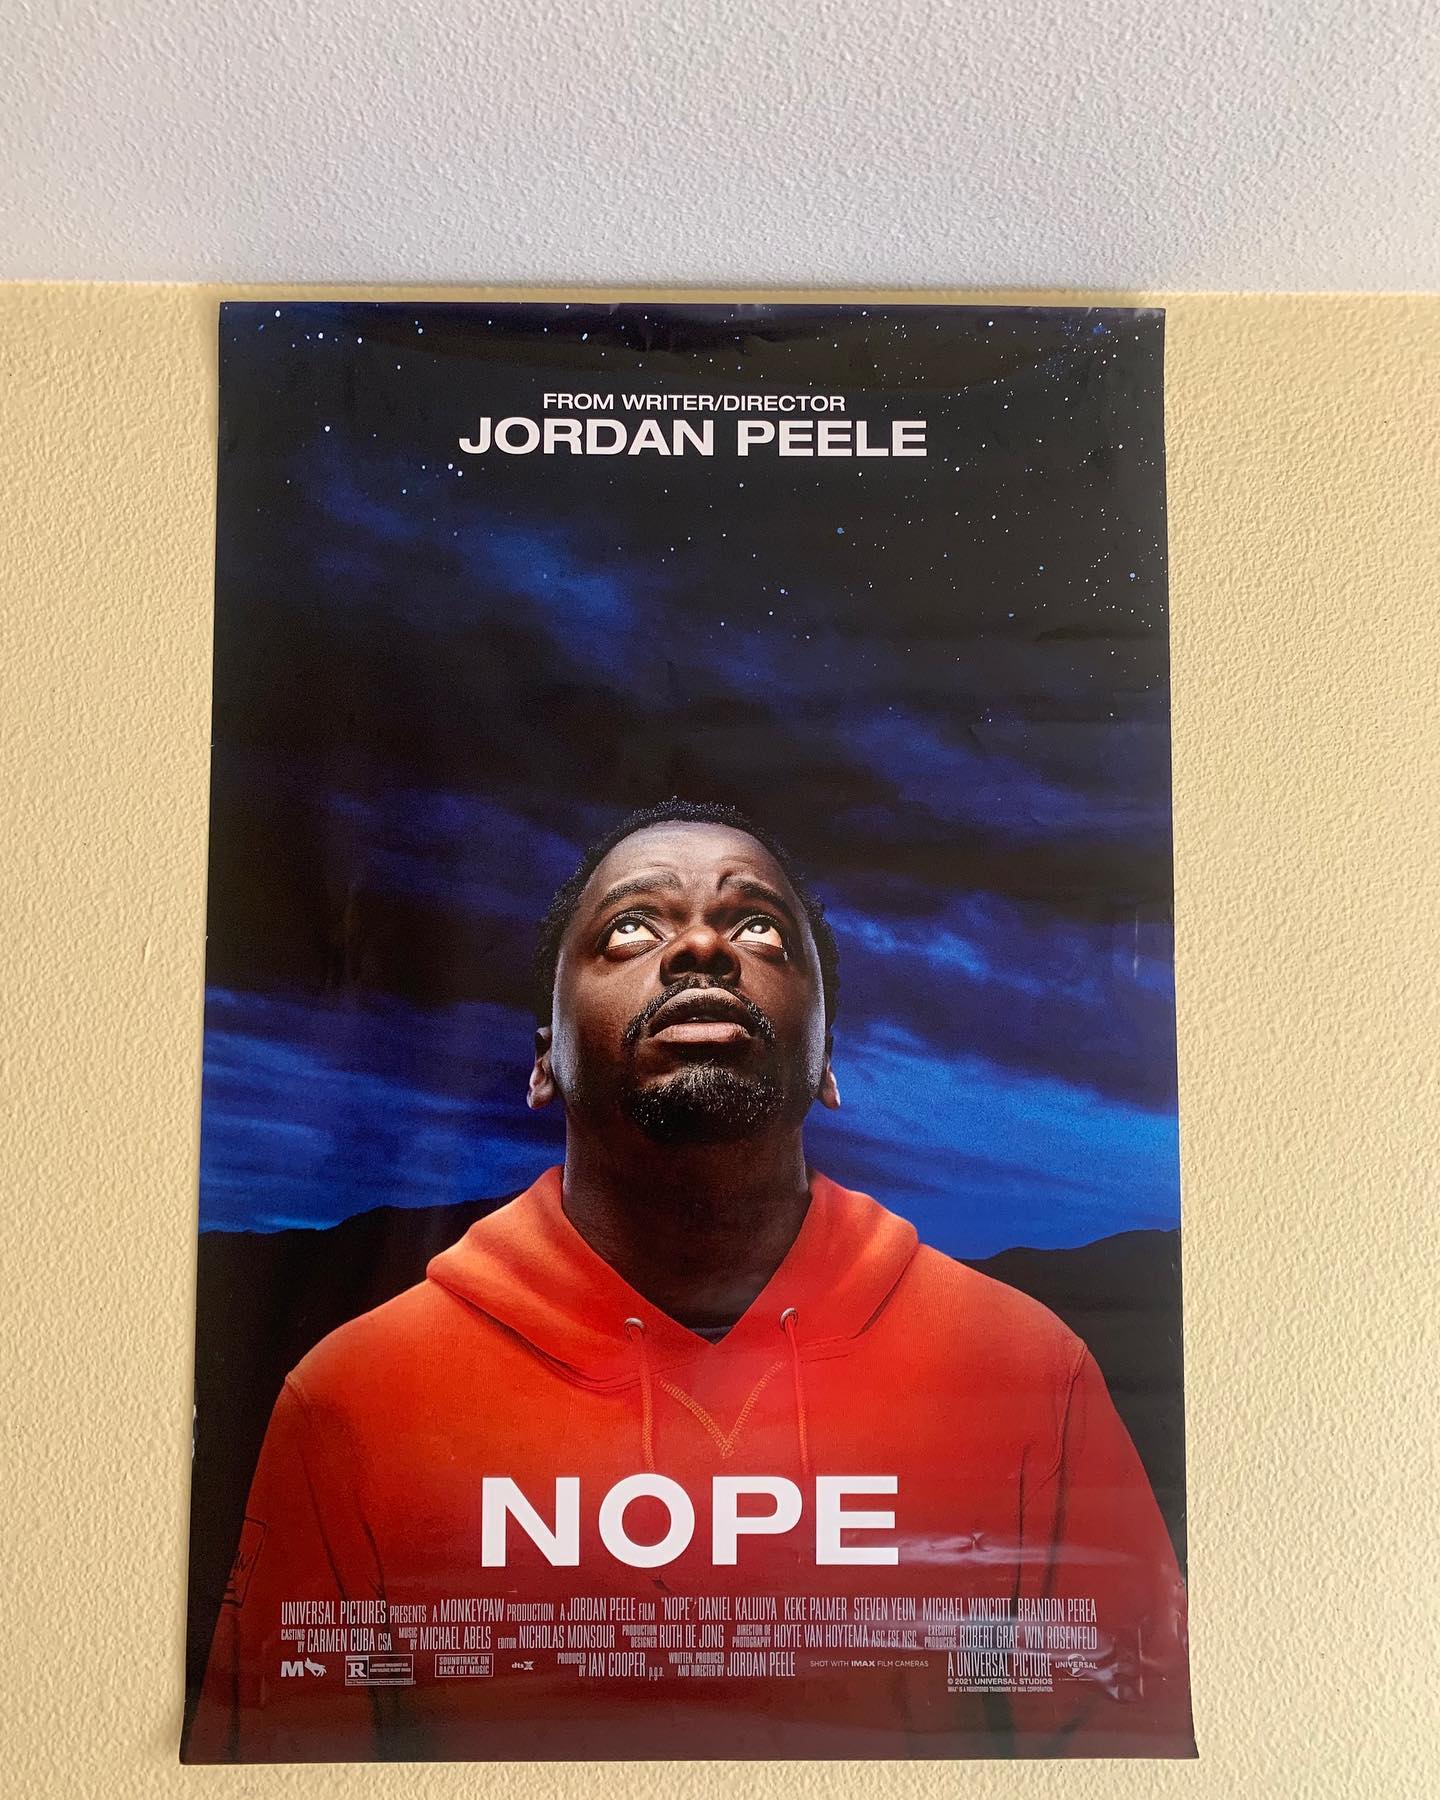 Jordan Peele’s ‘Nope’ is a well-made film that falls short even with stunningly handsome Daniel Kaluuya and laugh-out-loud Keke Palmer. Link in our bio. 

By: Raven Linton 
Photo by: Steffi Puerto

#Nope #JordanPeele #KekePalmer #DanielKaluuya #MovieReview #Movie